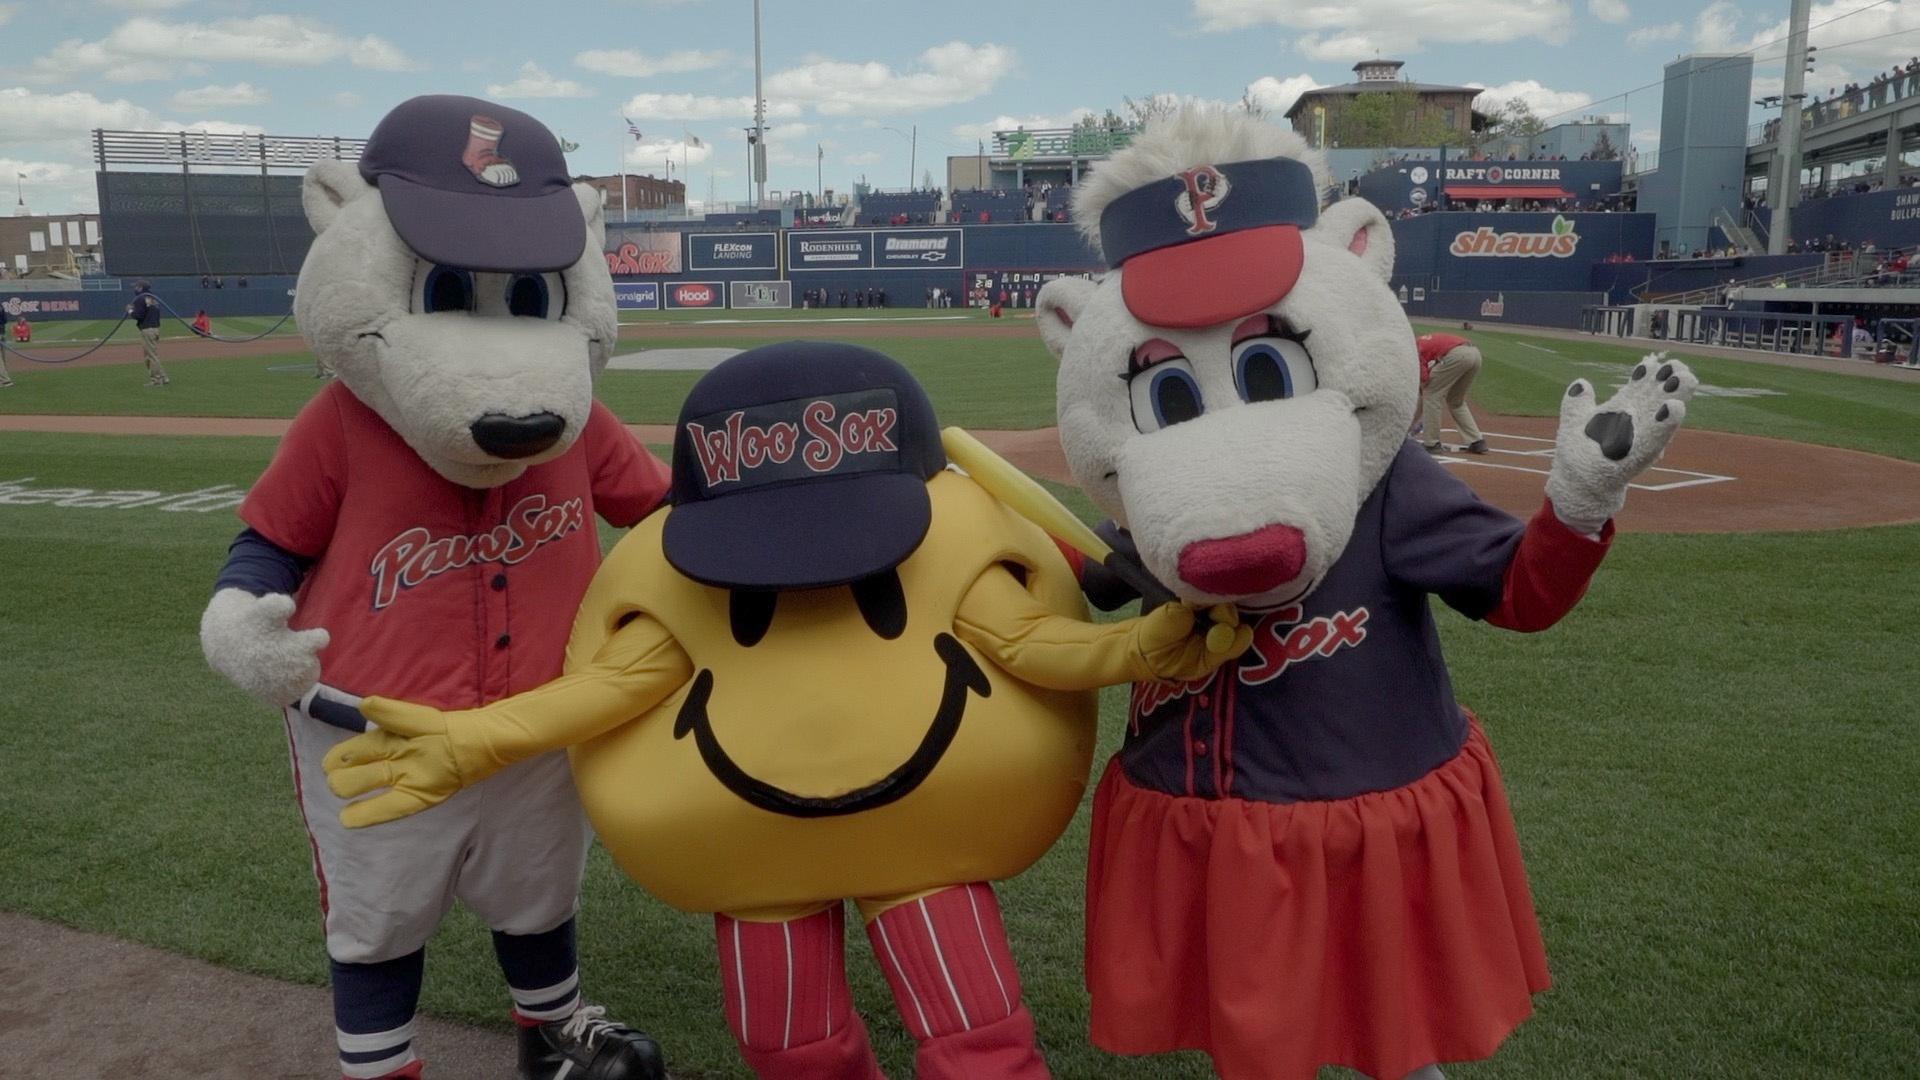 the pawsox mascot, Paws, the PawSox mascot between innings.…